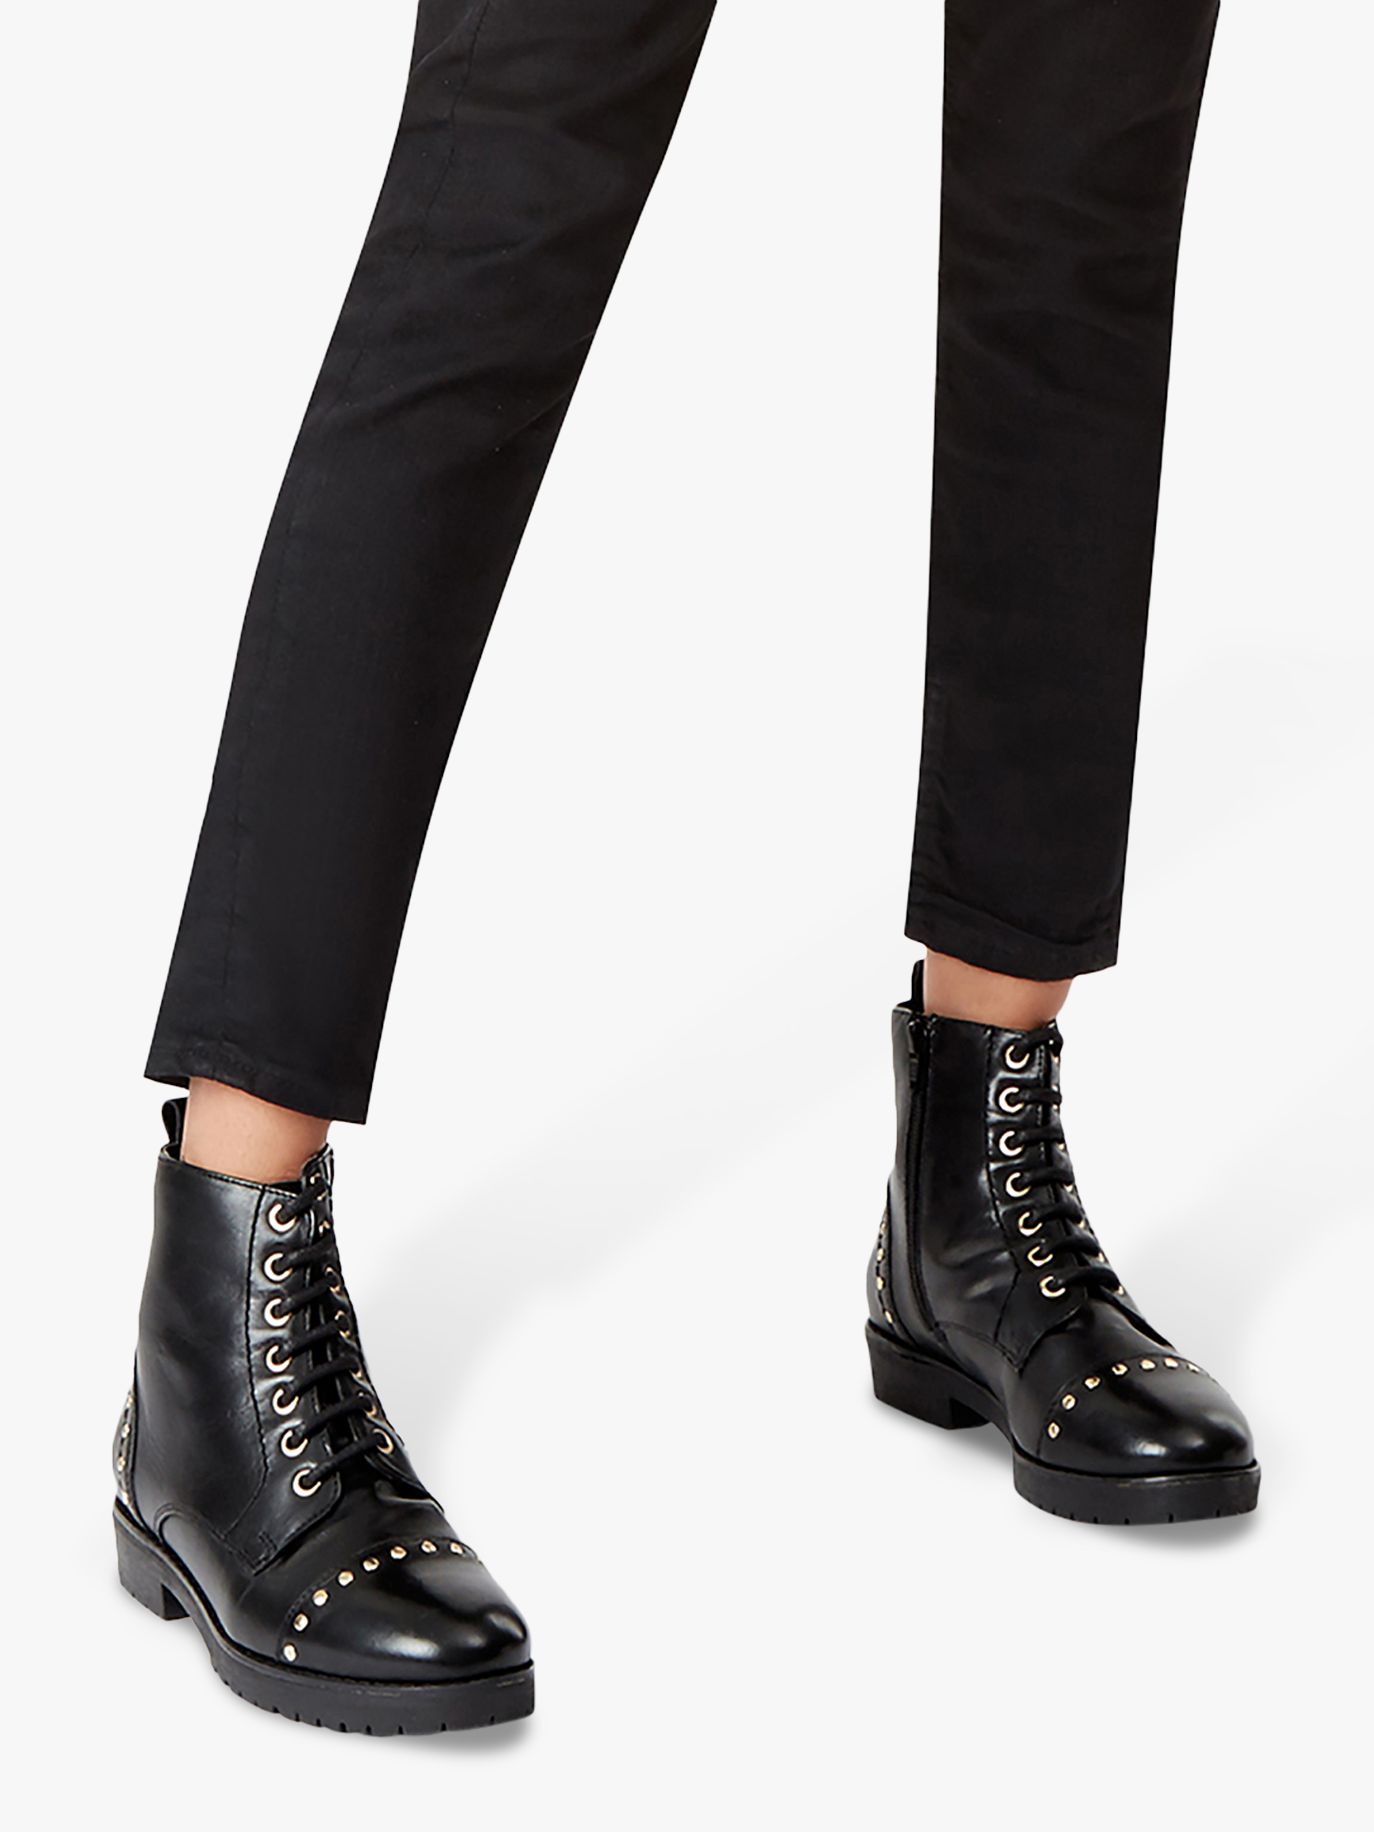 black lace up studded boots